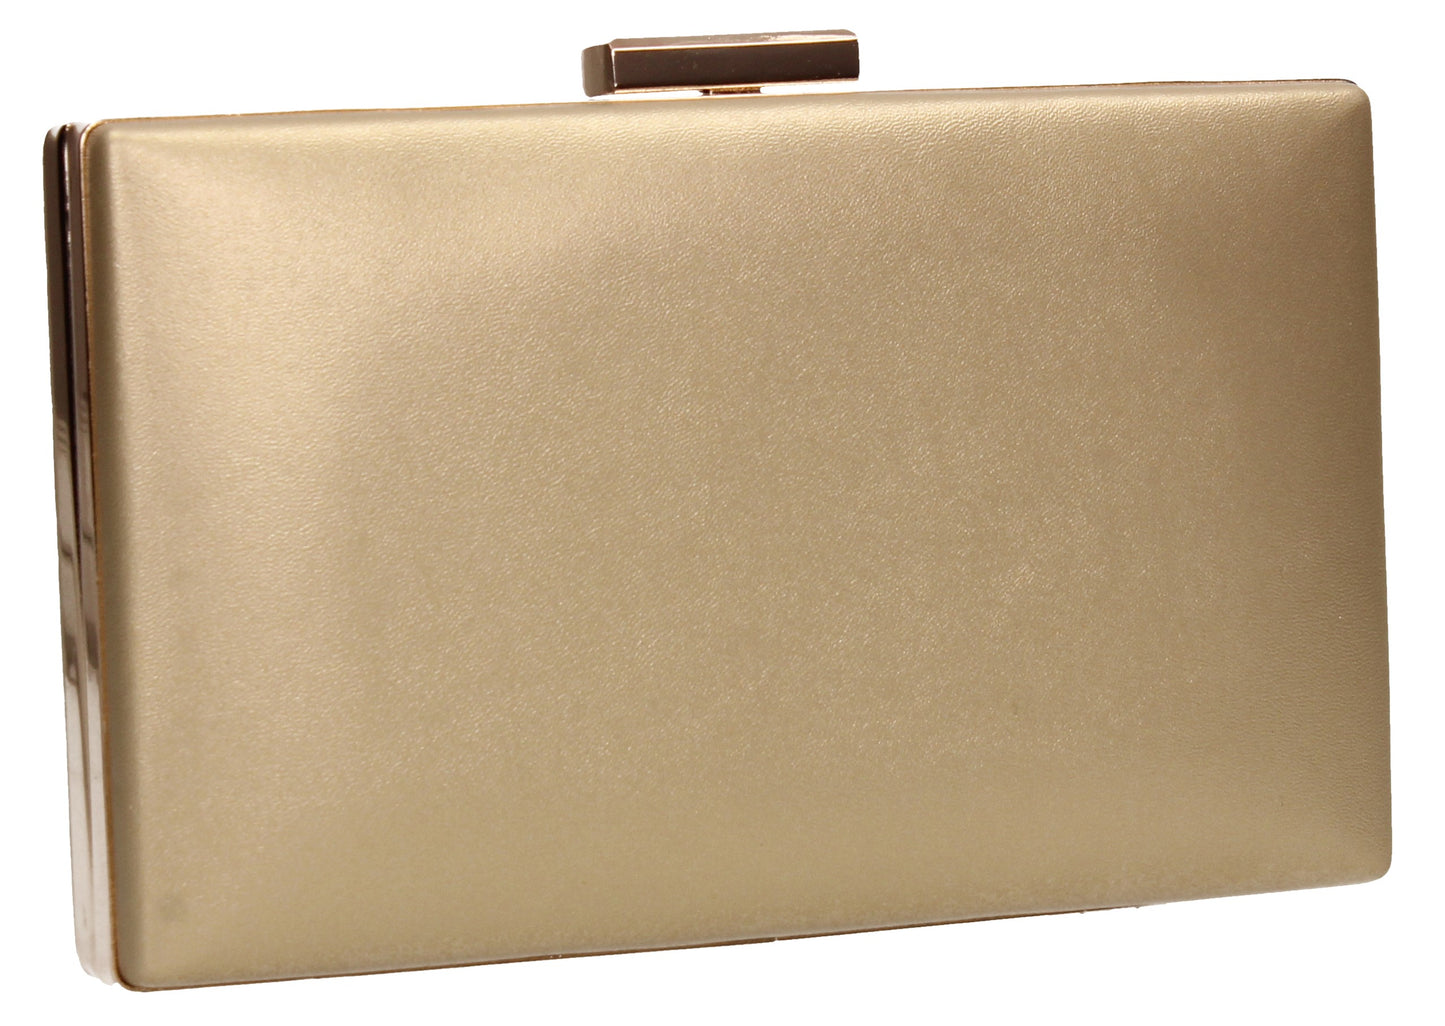 SWANKYSWANS Valery Floral Detail Clutch Bag Gold Cute Cheap Clutch Bag For Weddings School and Work